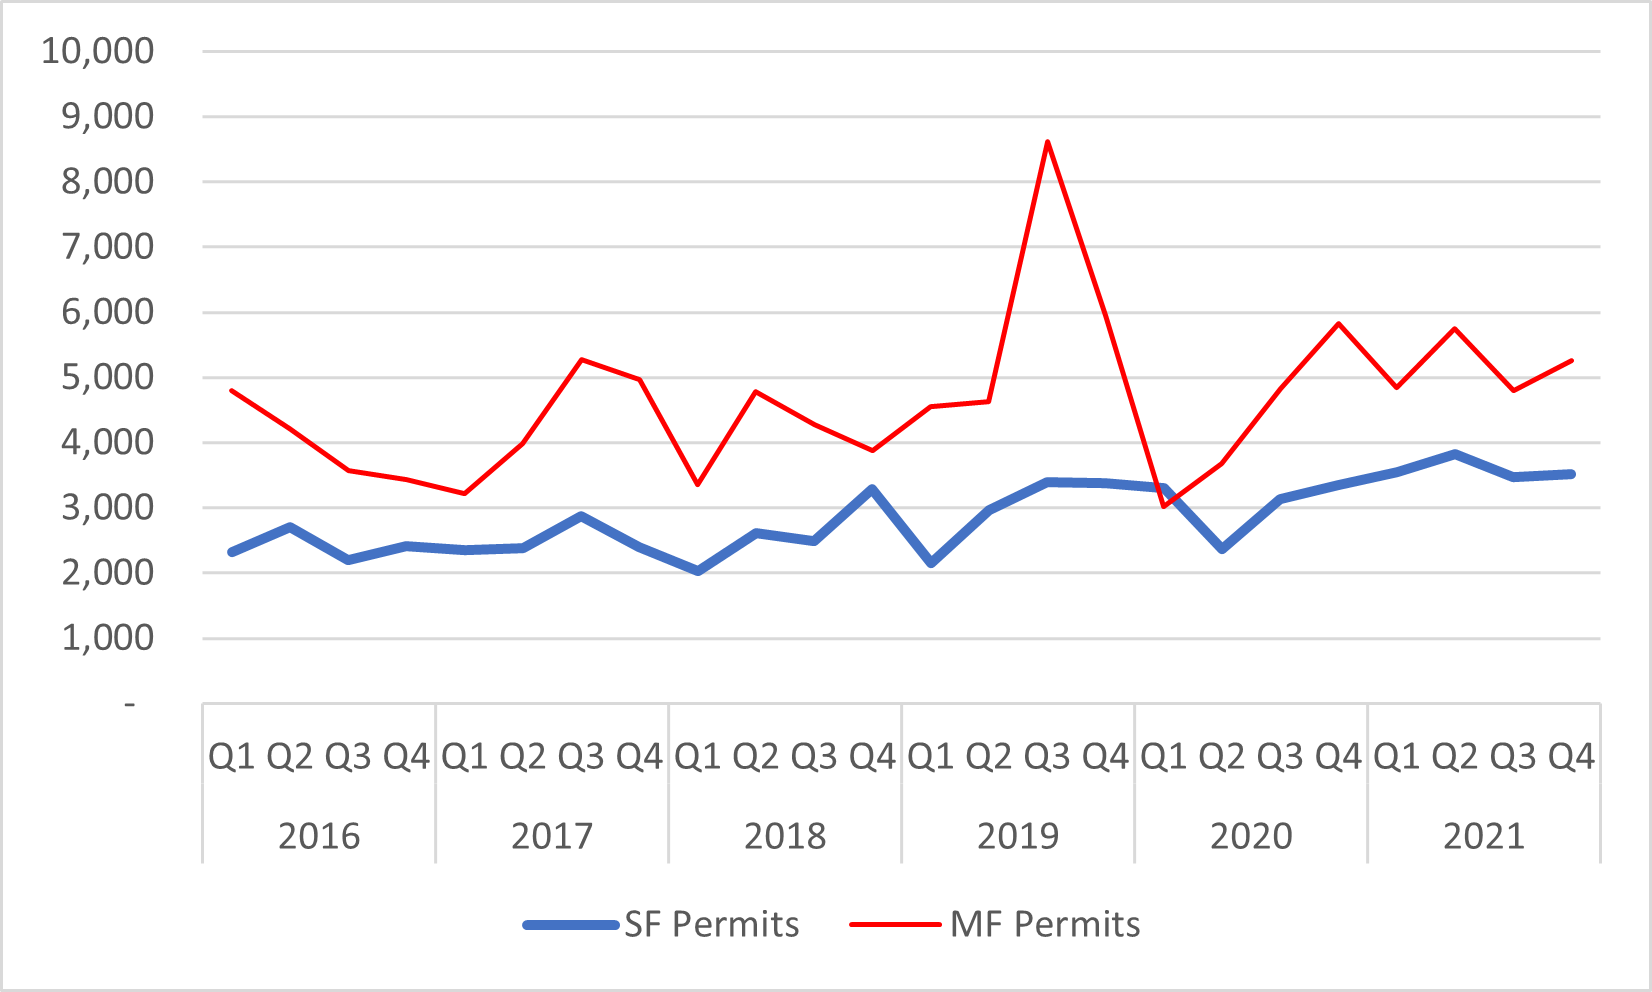 Figure 3: Single- and Multi-family Housing Permits Issued in New Jersey, Quarterly